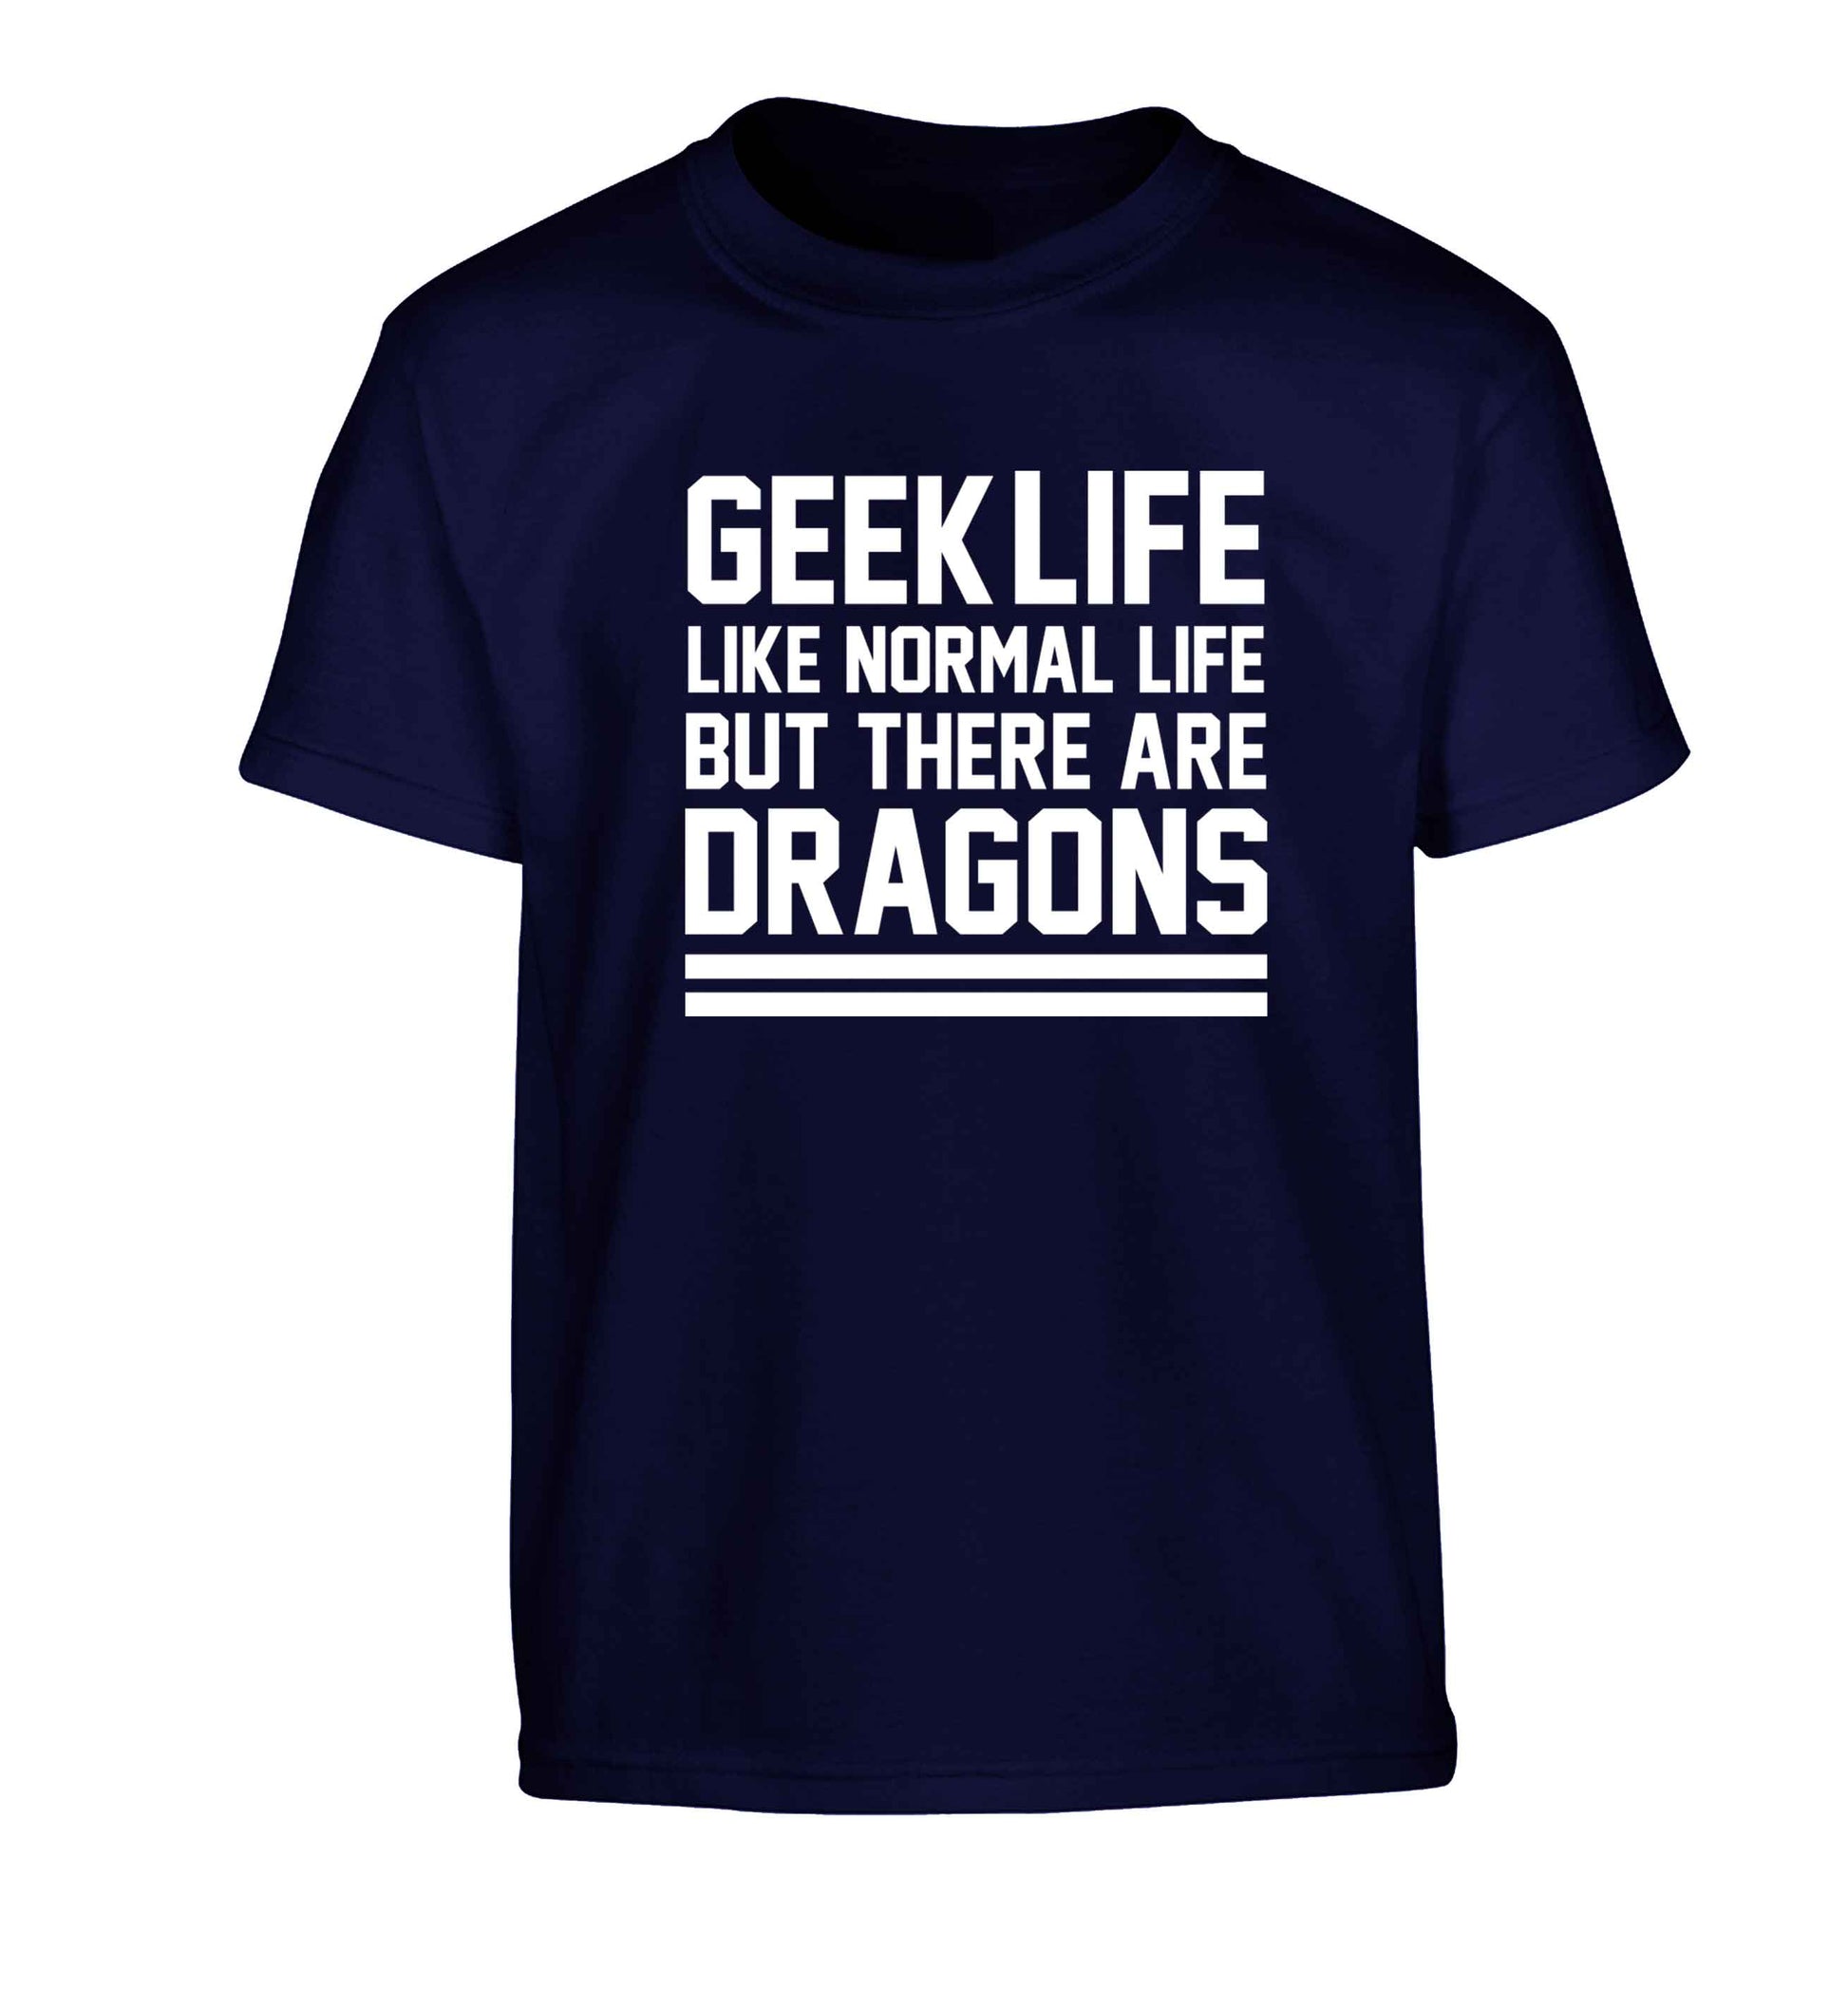 Geek life like normal life but there are dragons Children's navy Tshirt 12-13 Years